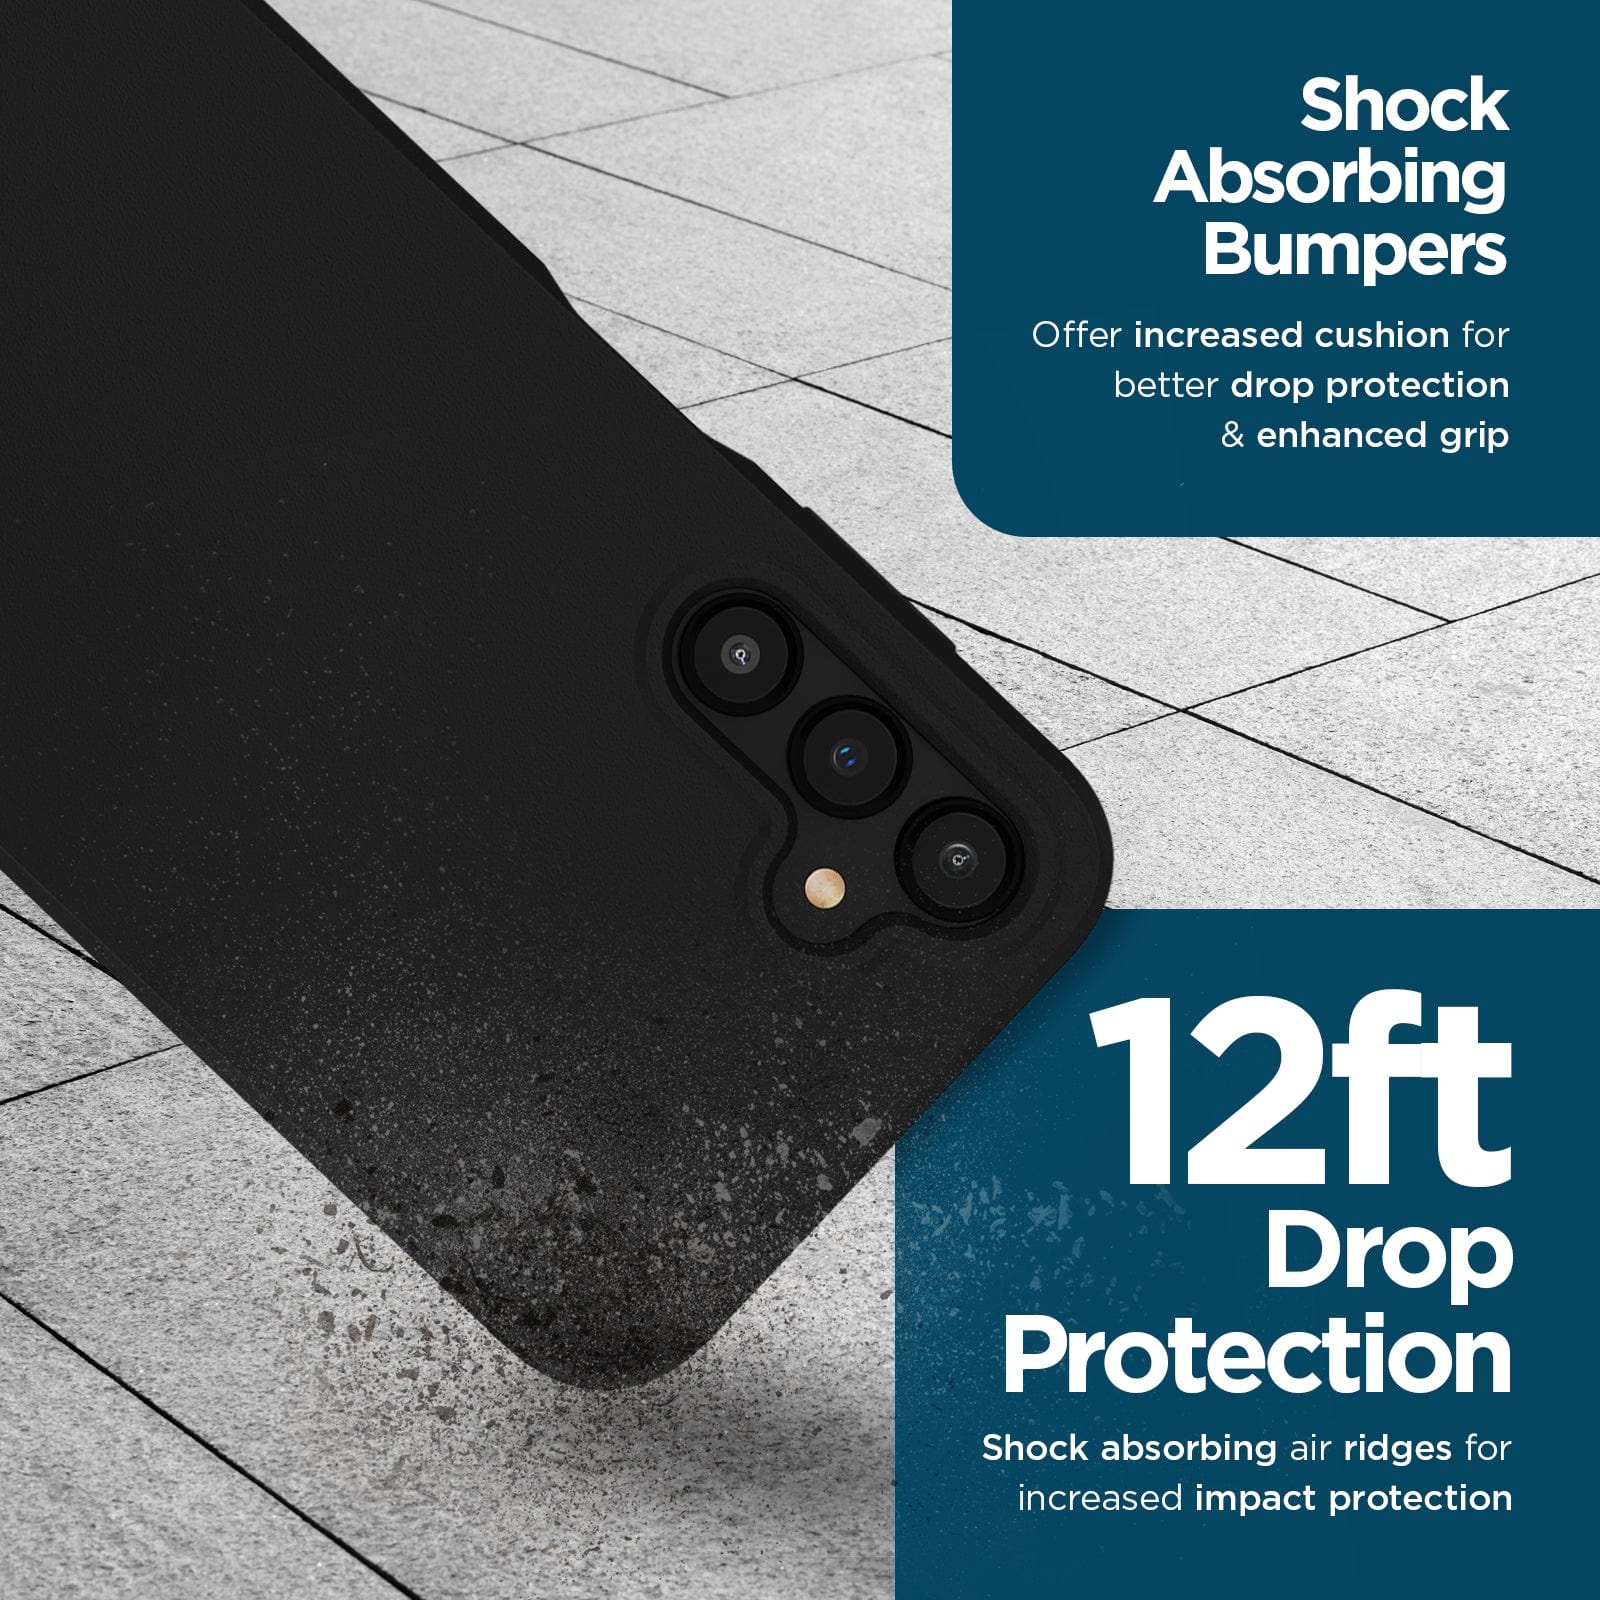 SHOCK ABSORBING BUMPERS OFFER INCREASED CUSHION FOR BETTER DROP PROTECTION AND ENHANCED GRIP. 12FT DROP PROTECTION SHOCK ABSORBING AIR RIDGES FOR INCREASED IMPACT PROTECTION